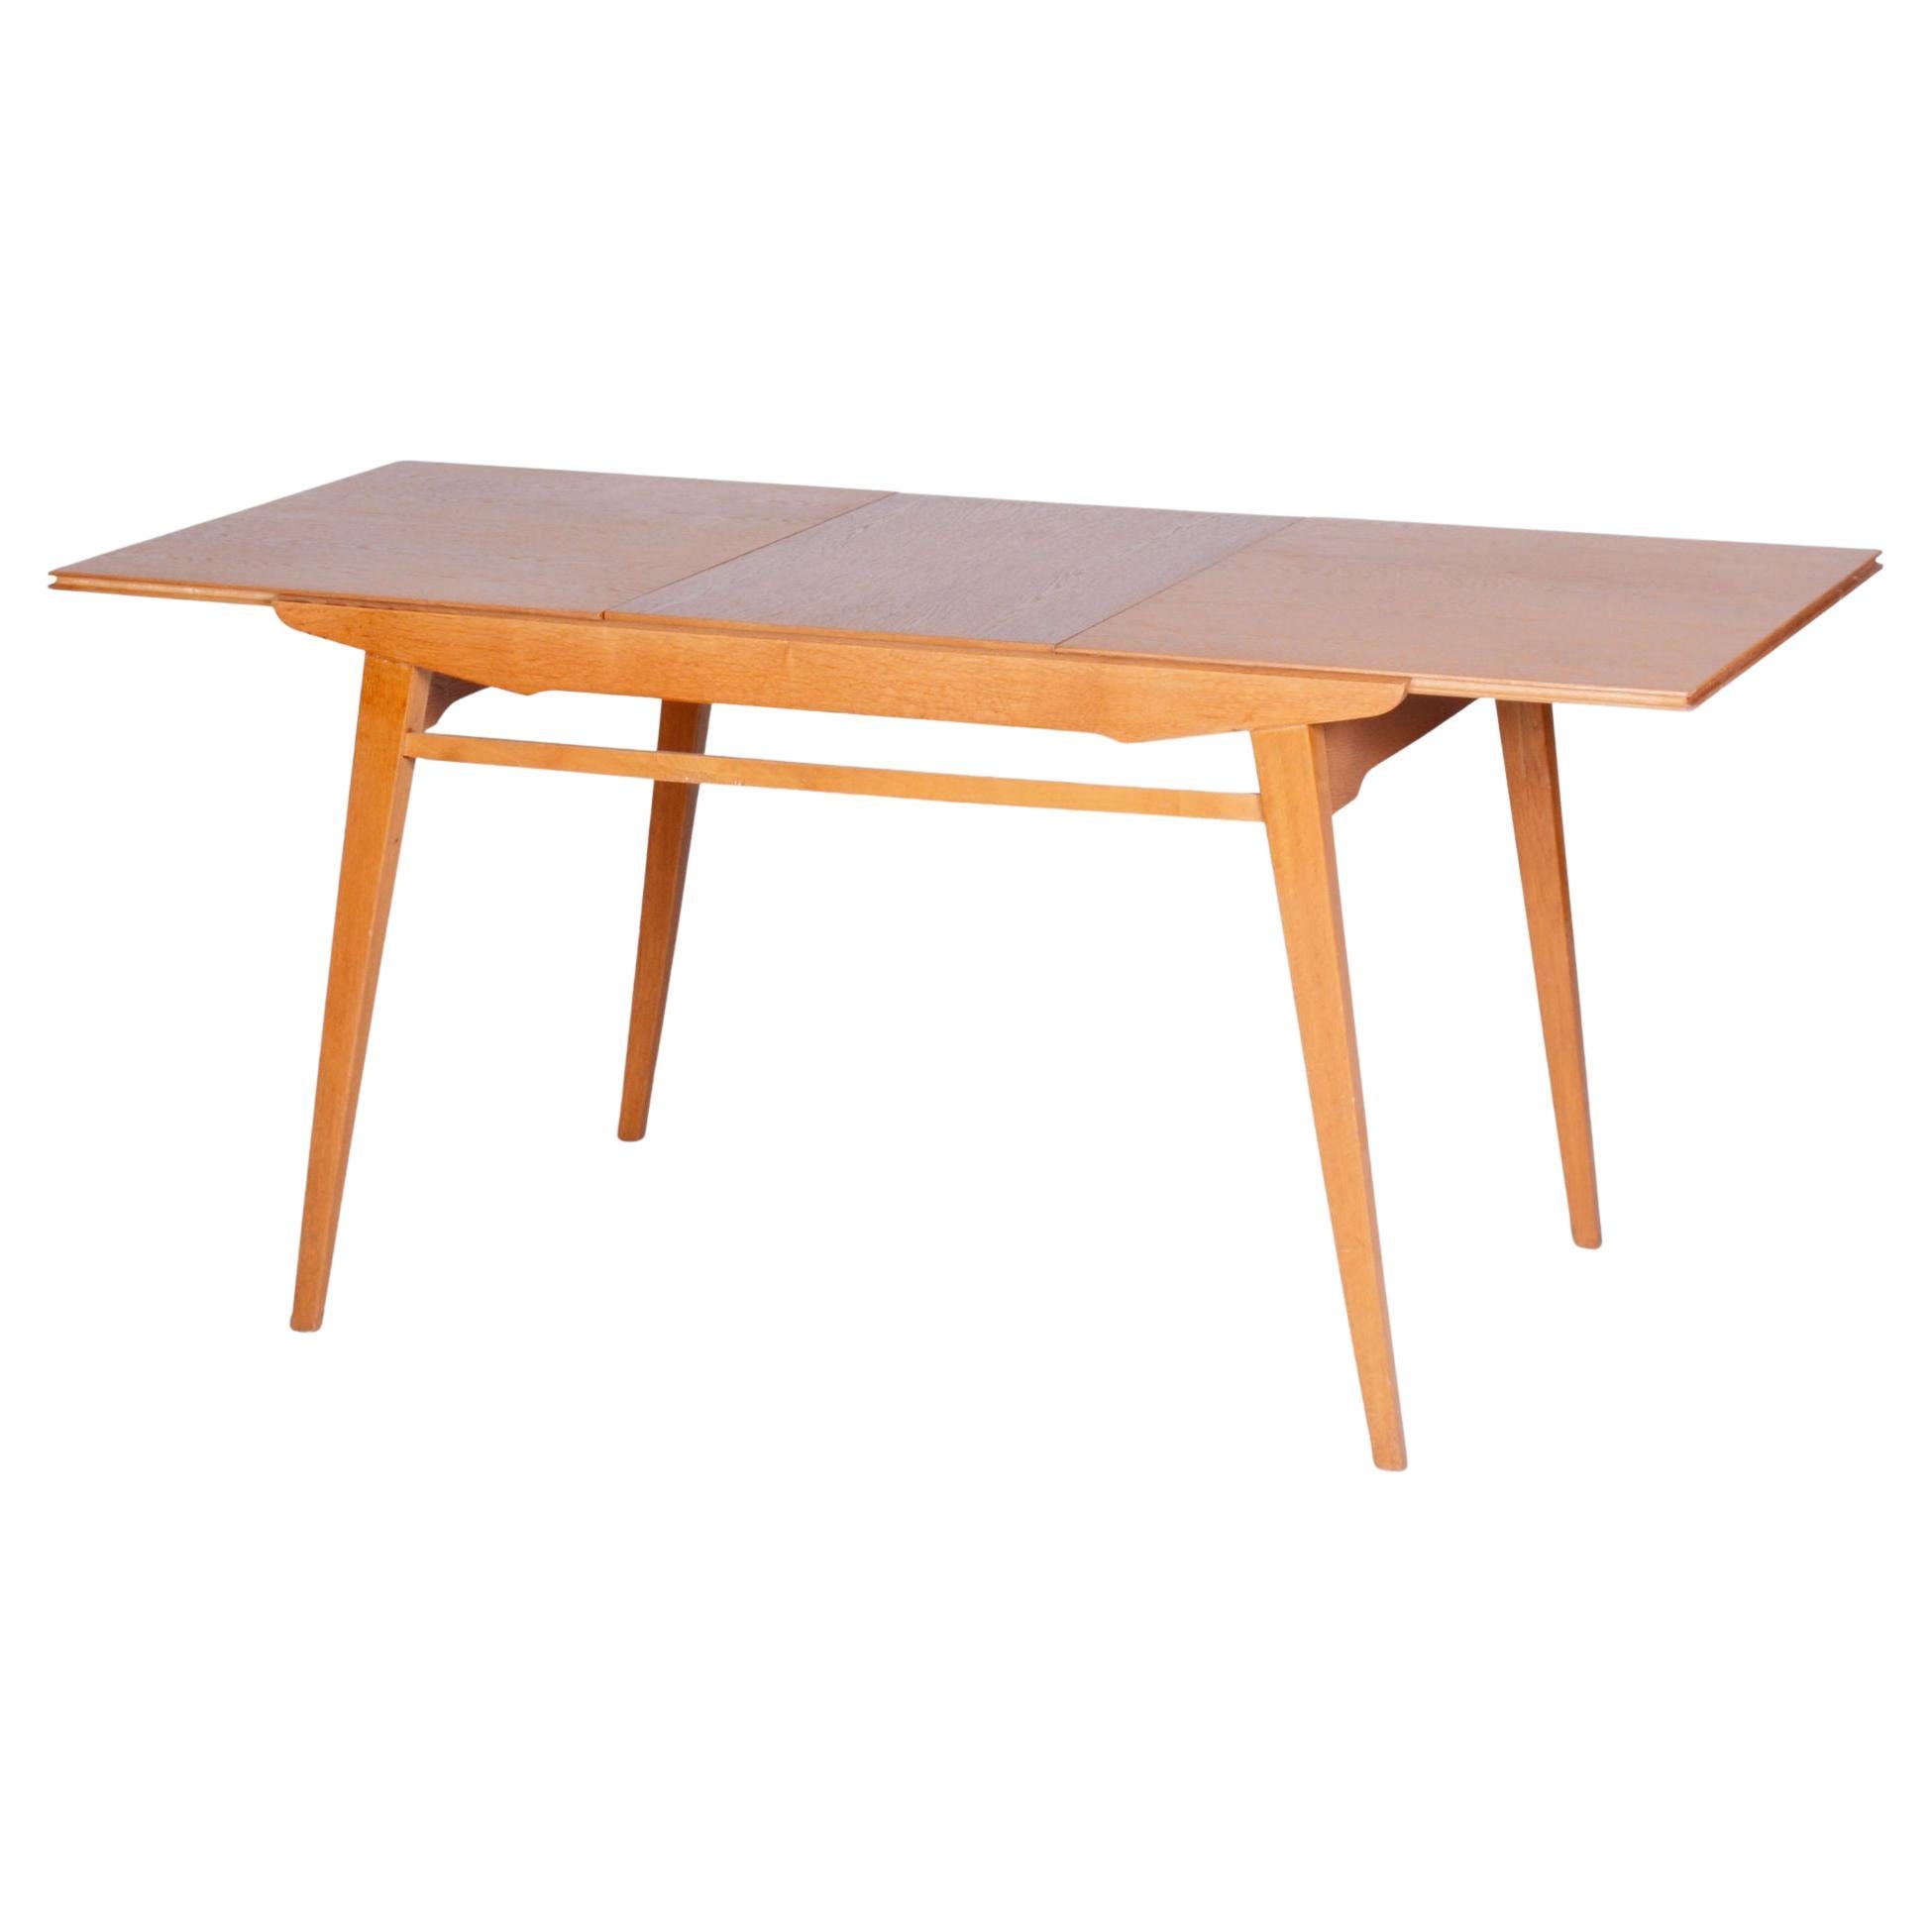 Restored Midcentury Oak Extendable Dining Table, Revived Polish, Czechia, 1950s For Sale